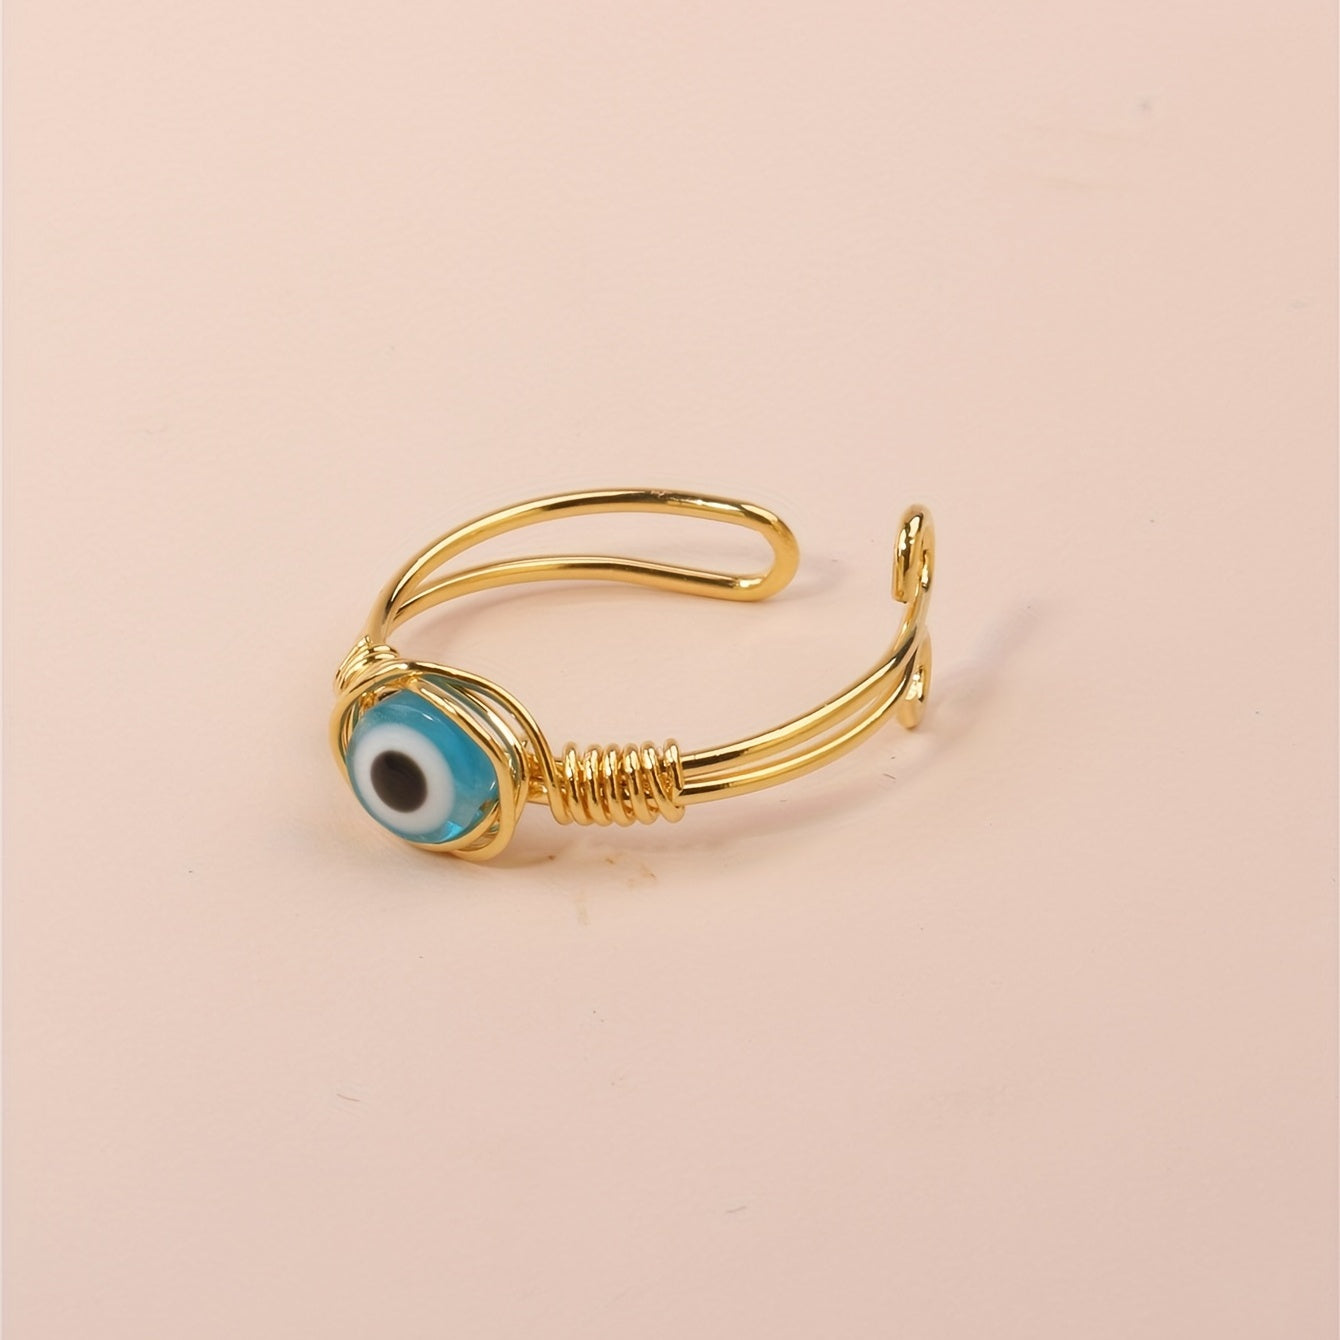 1Pc Evil Eye Ring Wire Wrapped Glass Bead Ring For Female Protection Lucky Jewelry Girlfriend Birthday Gift